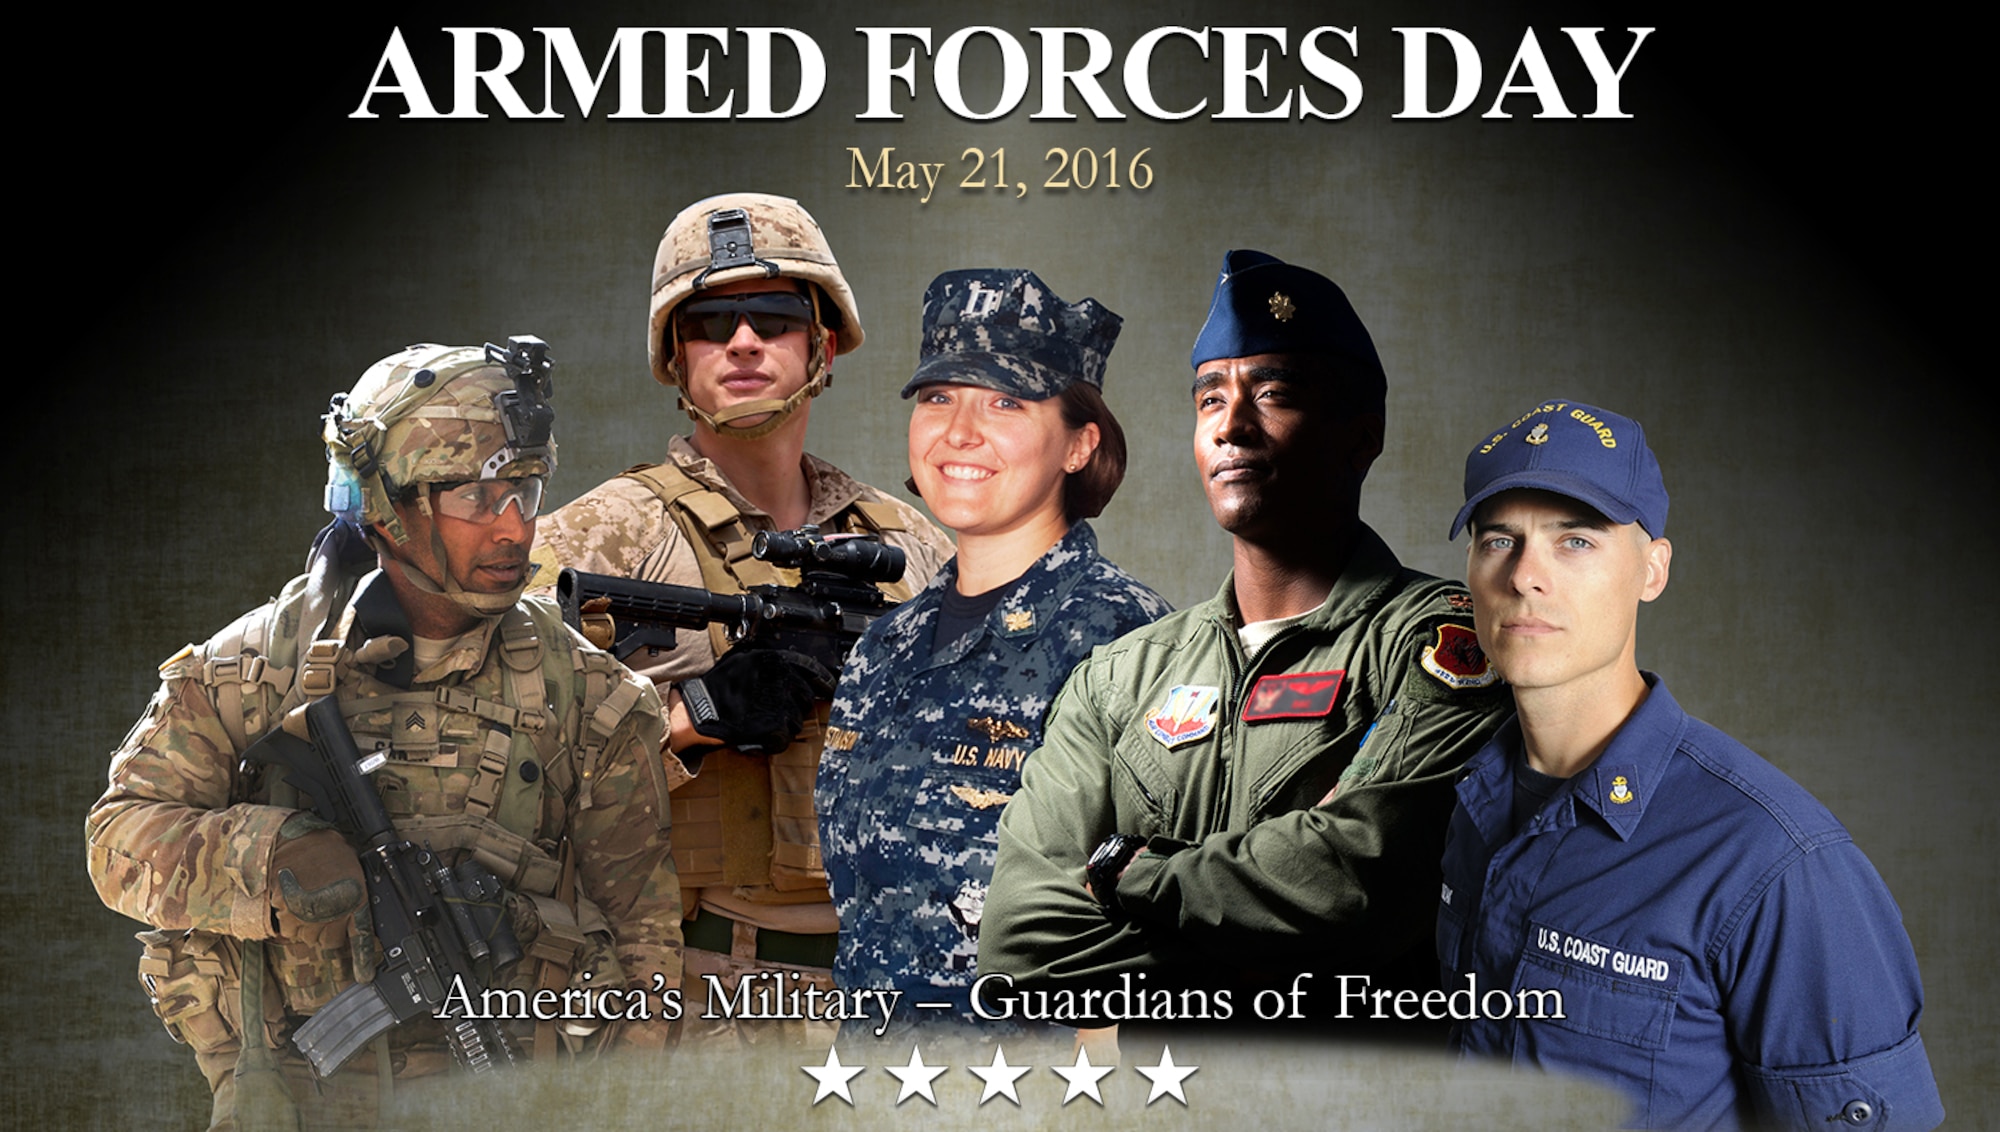 On August 31, 1949, Secretary of Defense Louis Johnson announced the creation of an Armed Forces Day to replace separate Army, Navy and Air Force Days. The single-day celebration stemmed from the unification of the Armed Forces under one department – the Department of Defense.